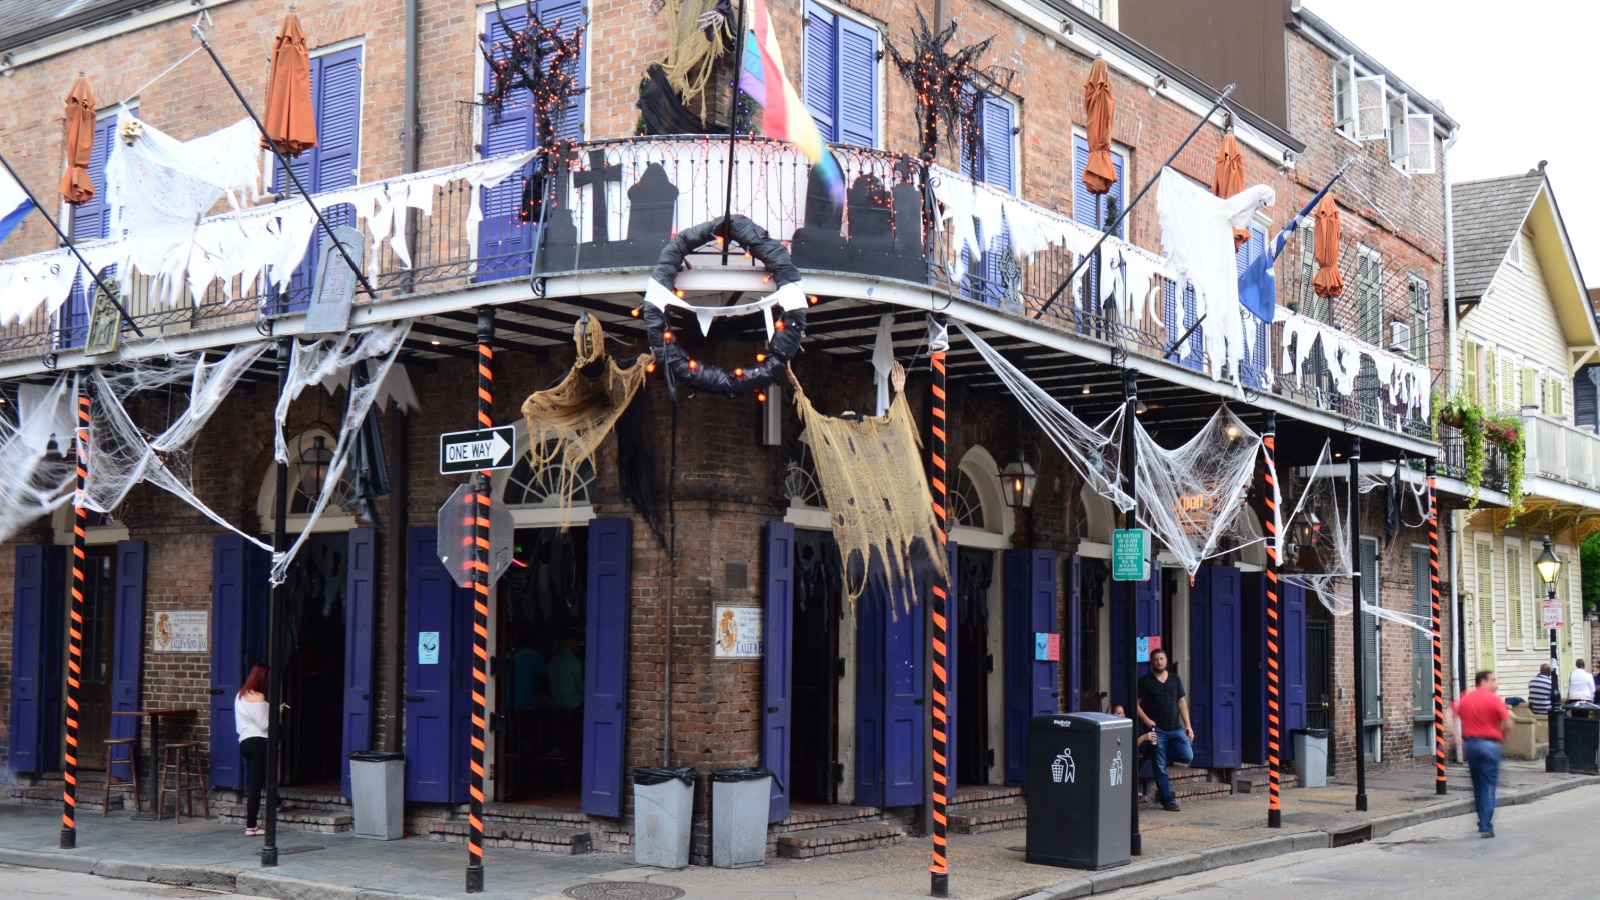 New Orleans, LA, USA October 27, 2015 A store in the French Quarter of New Orleans is decorated for Halloween